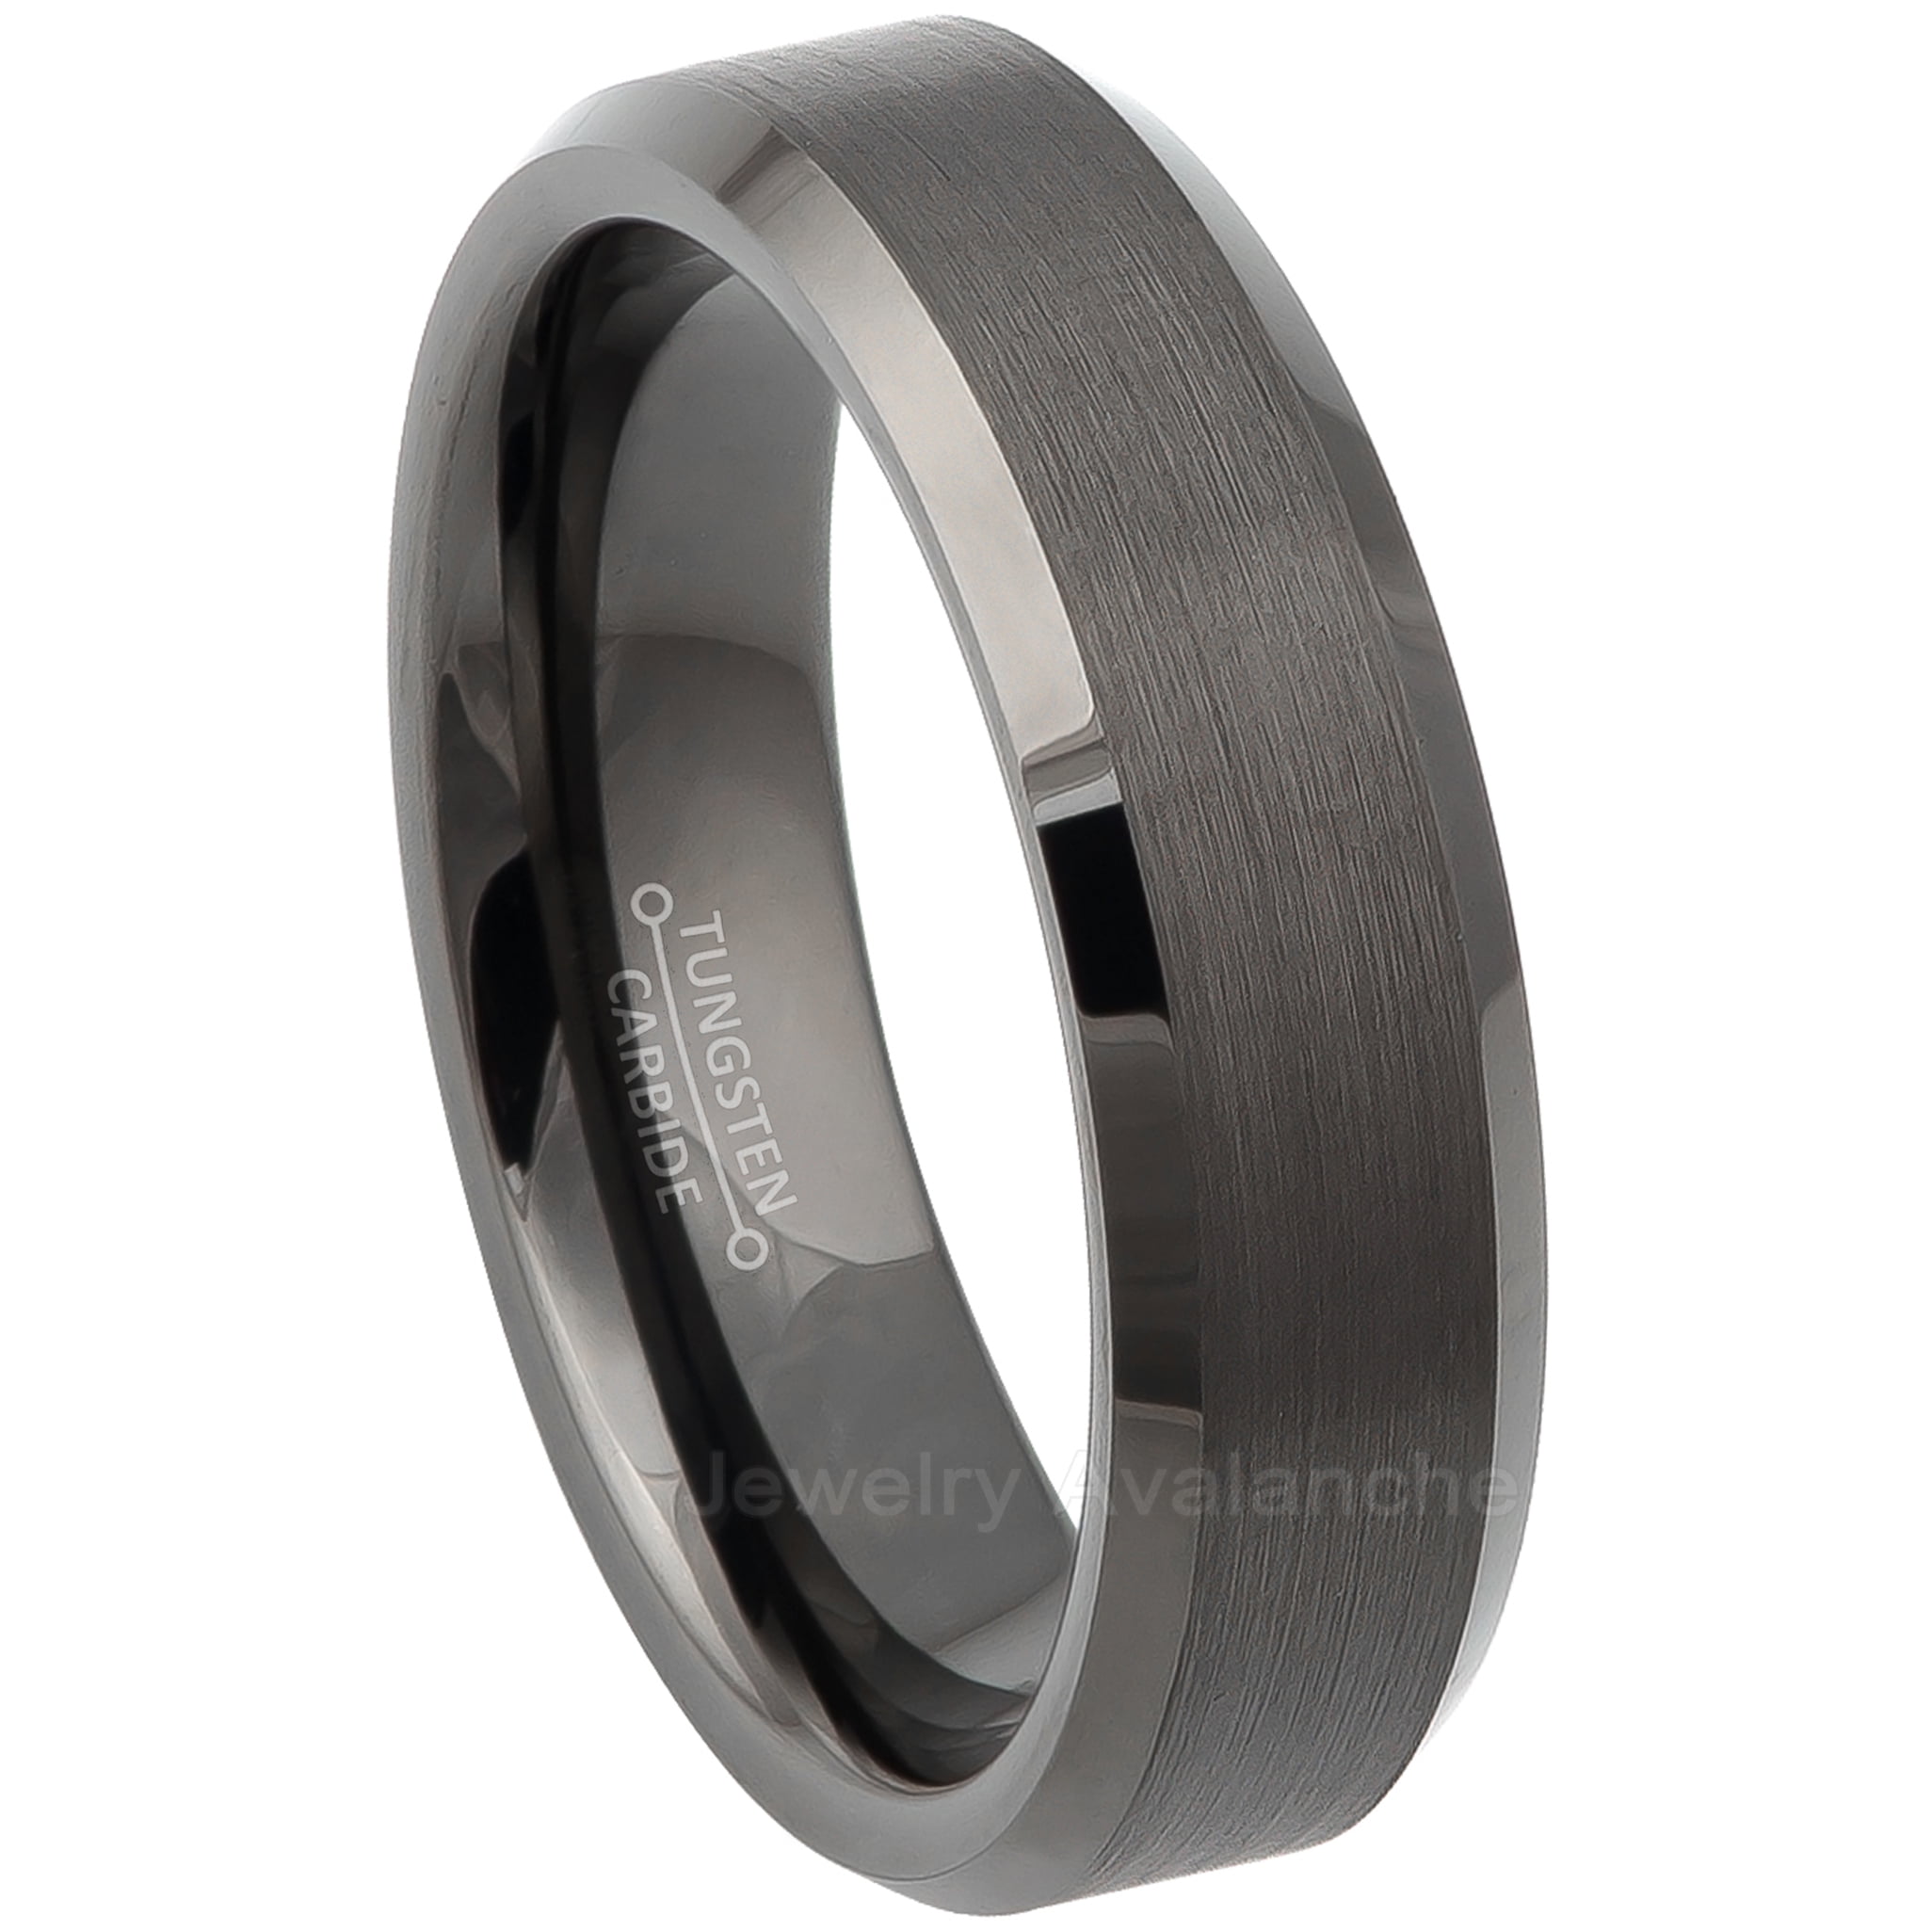 Wedding Band and Anniversary Ring Designed For Maximum Comfort Fit For Men And Women Use Size 6.5 Black Tungsten Guns and Skull Ring 8mm